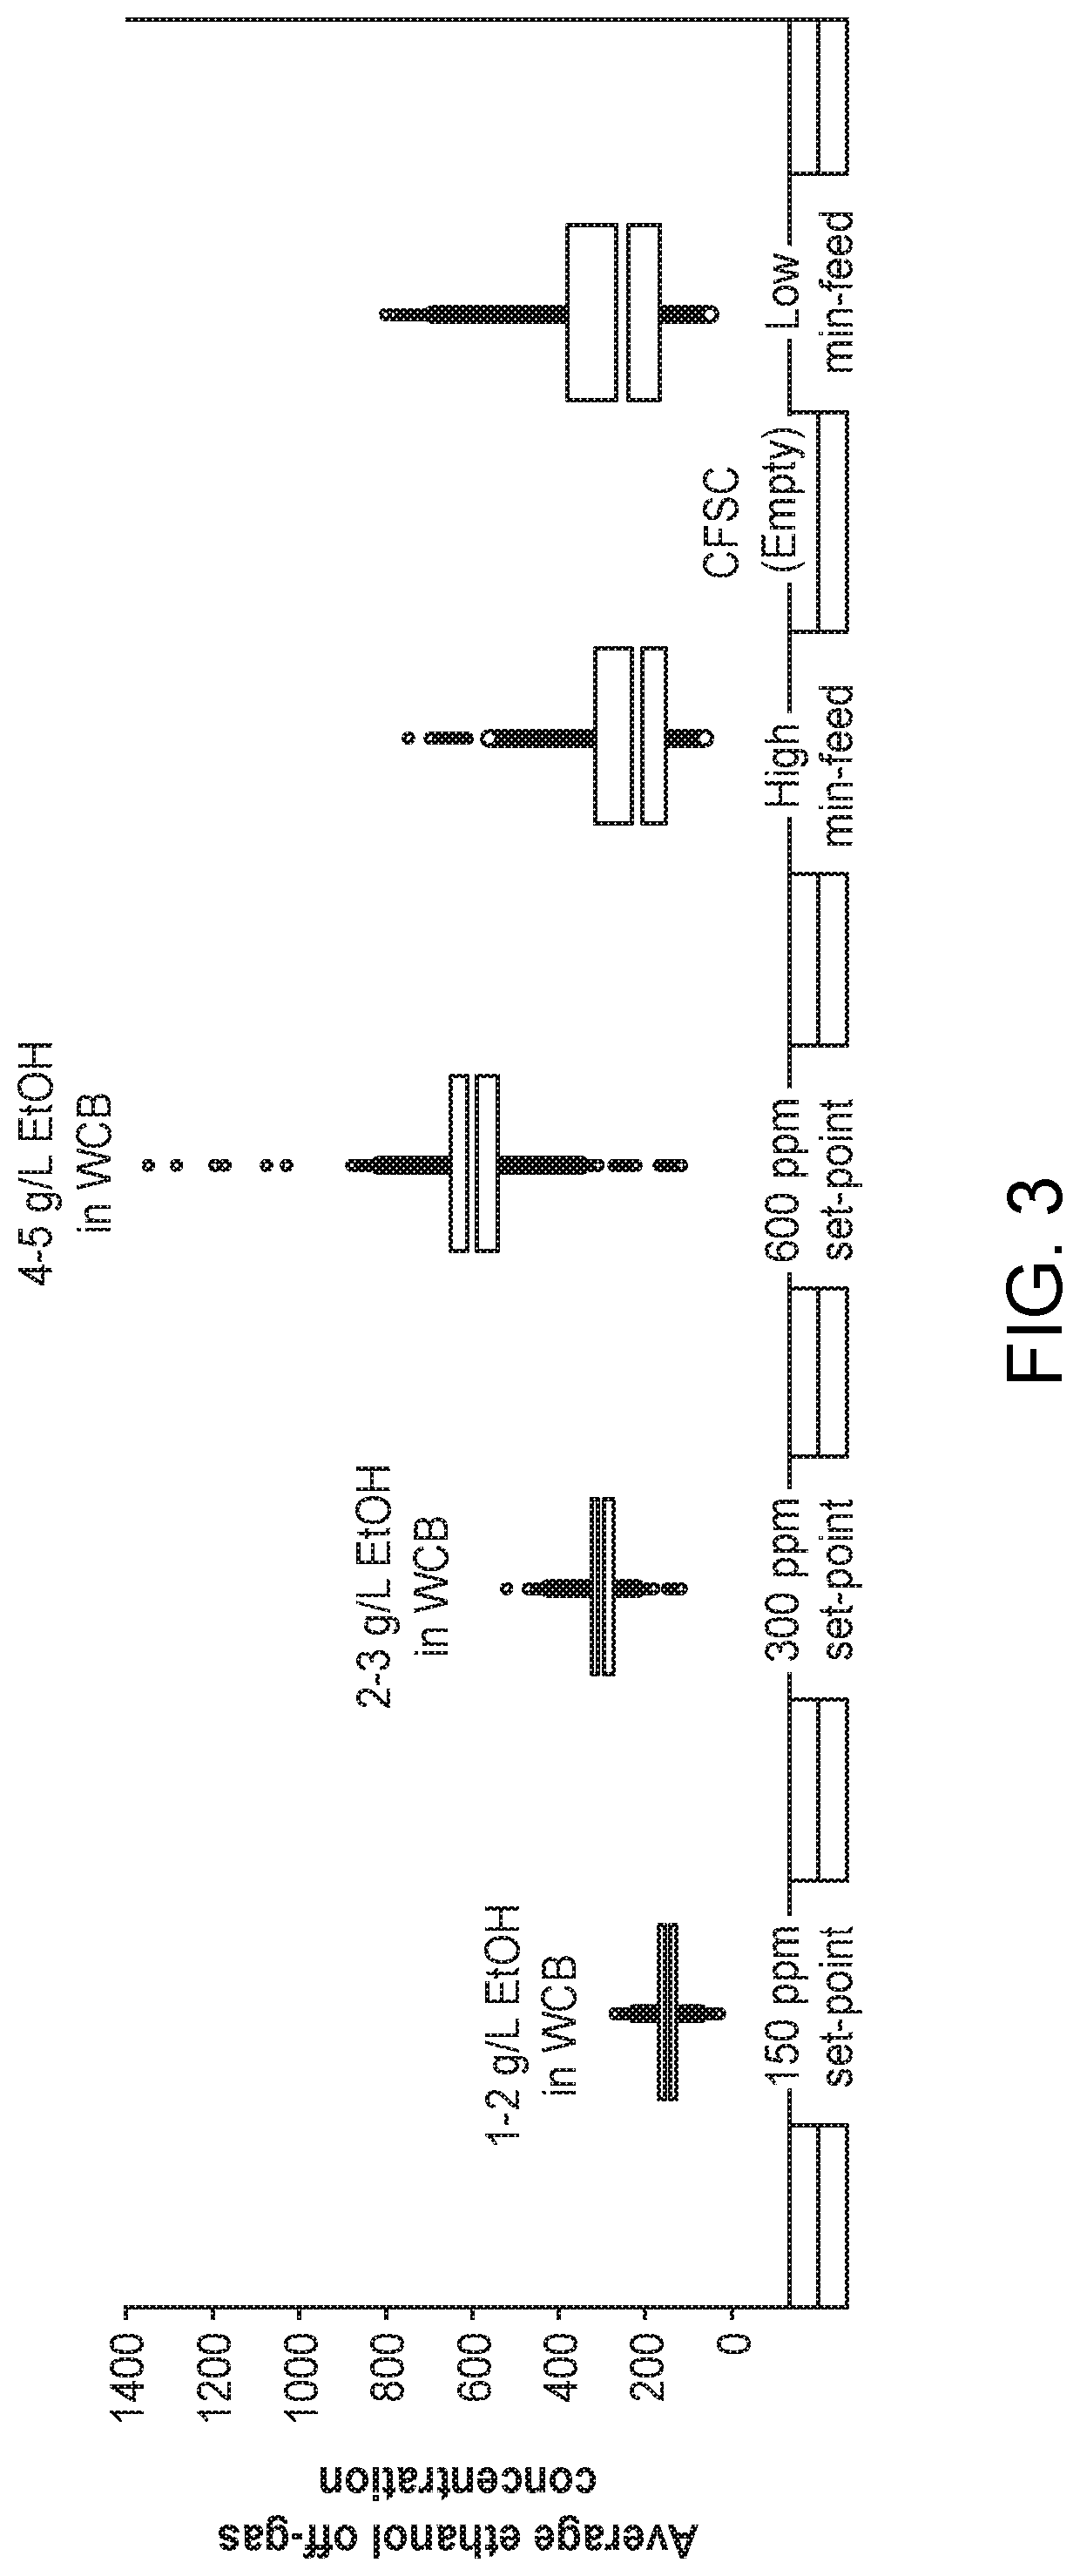 Methods for controlling fermentation feed rates